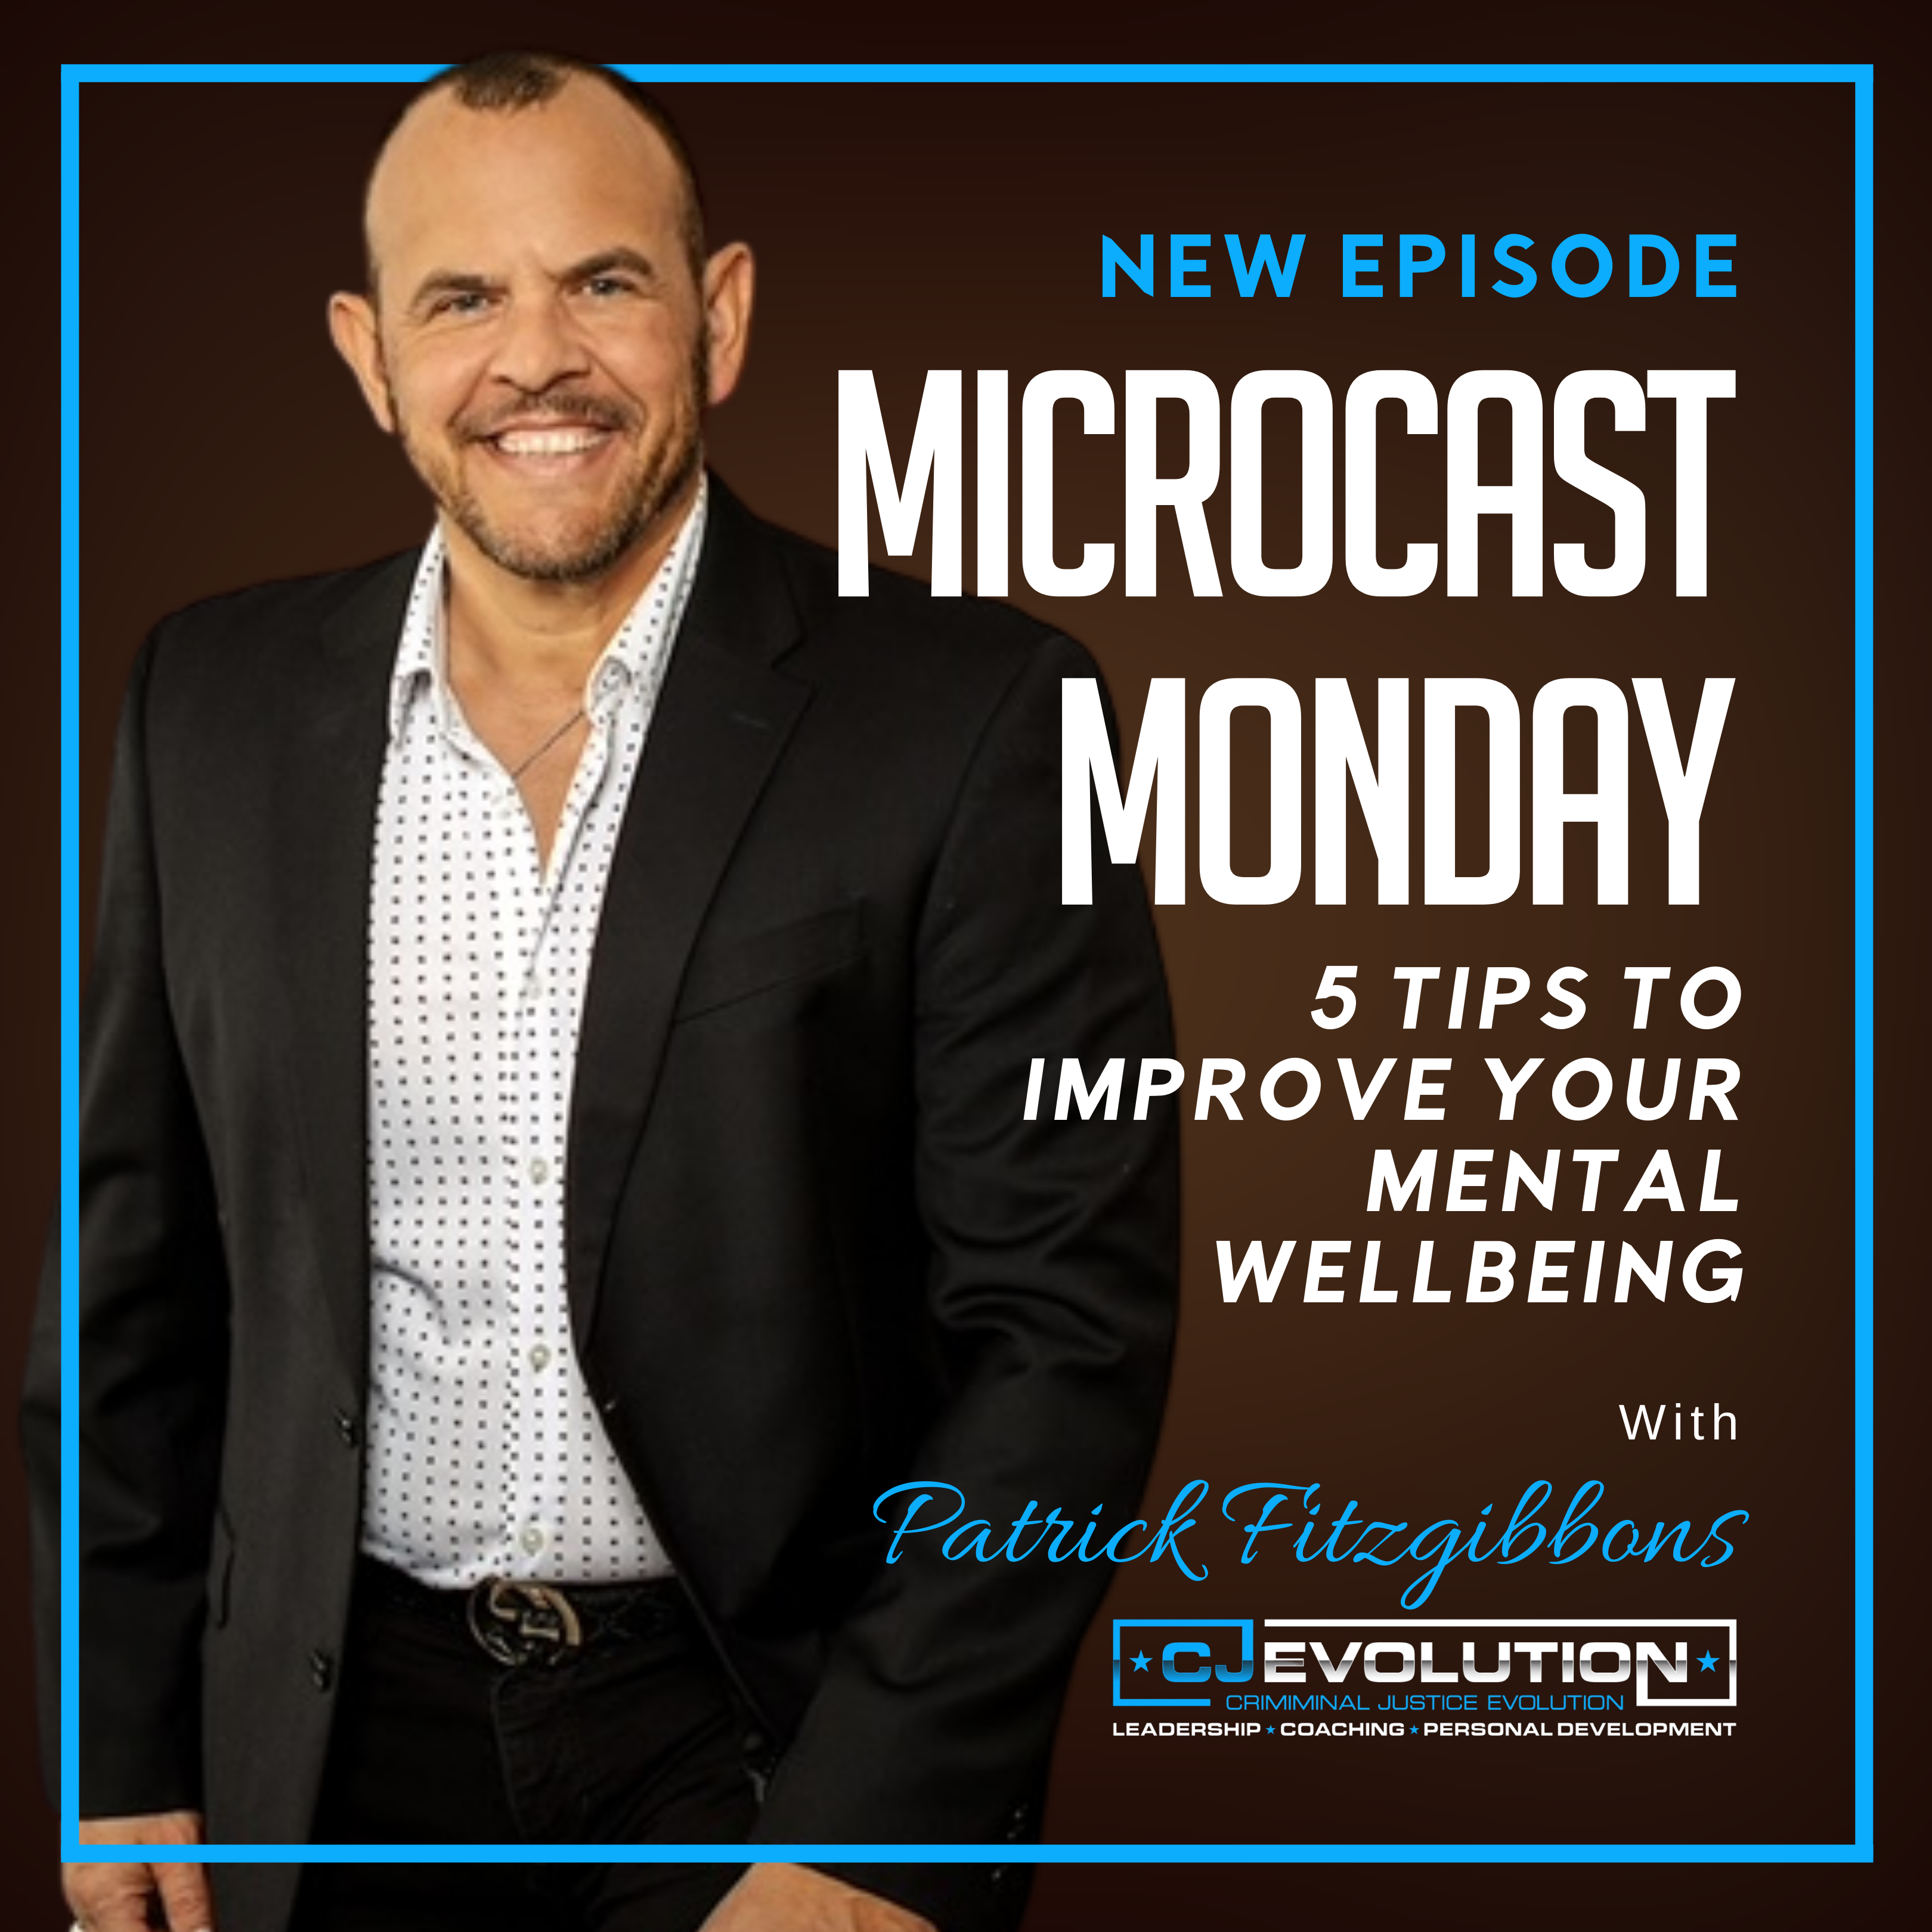 Microcast Monday #136 – 5 Tips to Improve Your Mental Wellbeing